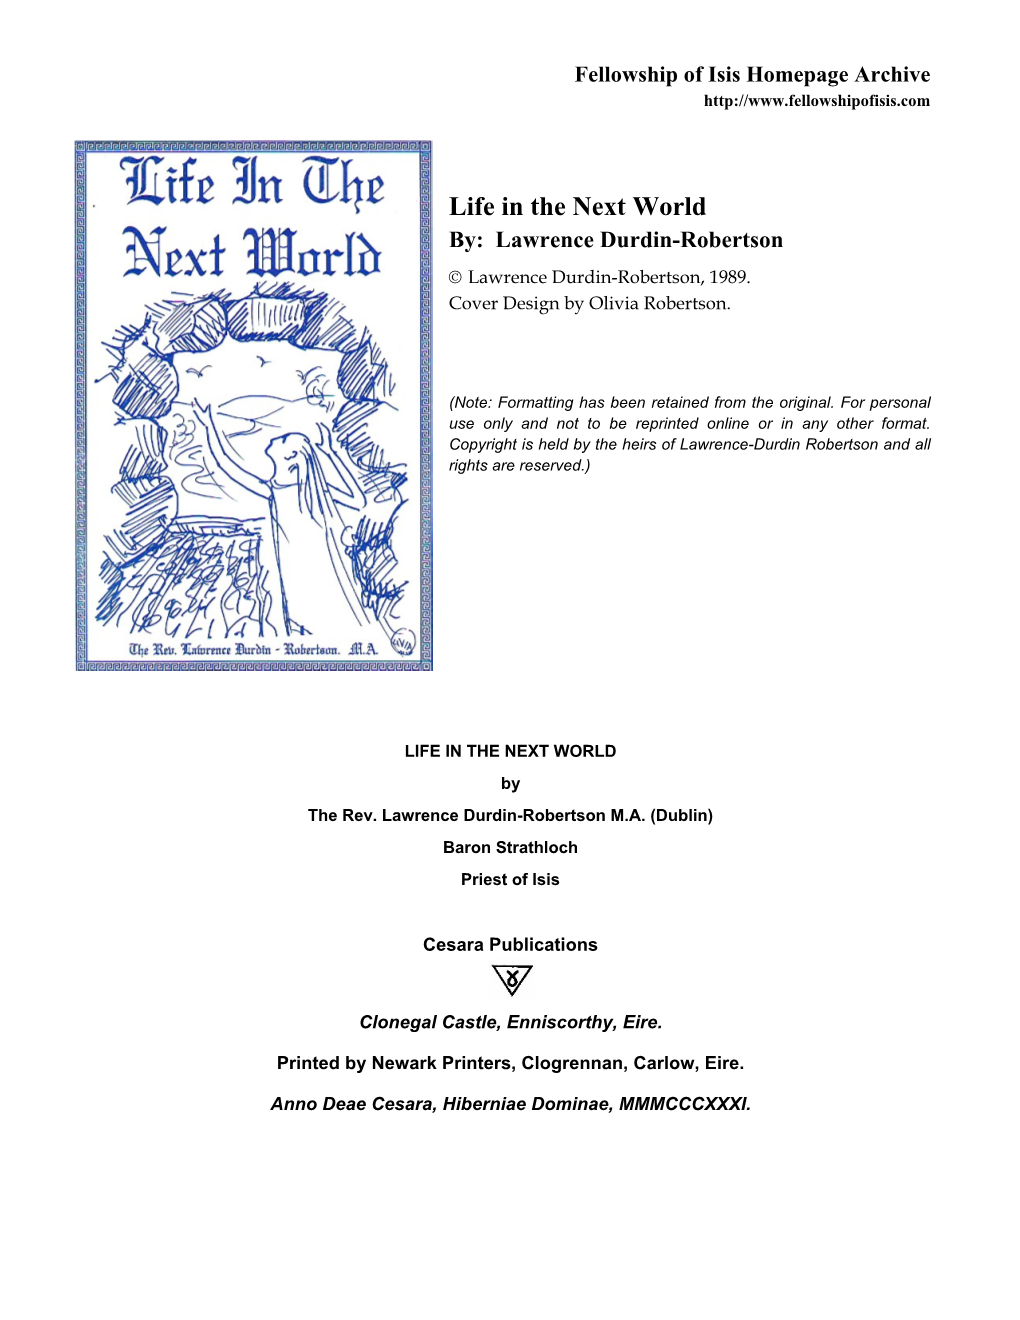 Life in the Next World By: Lawrence Durdin-Robertson © Lawrence Durdin-Robertson, 1989